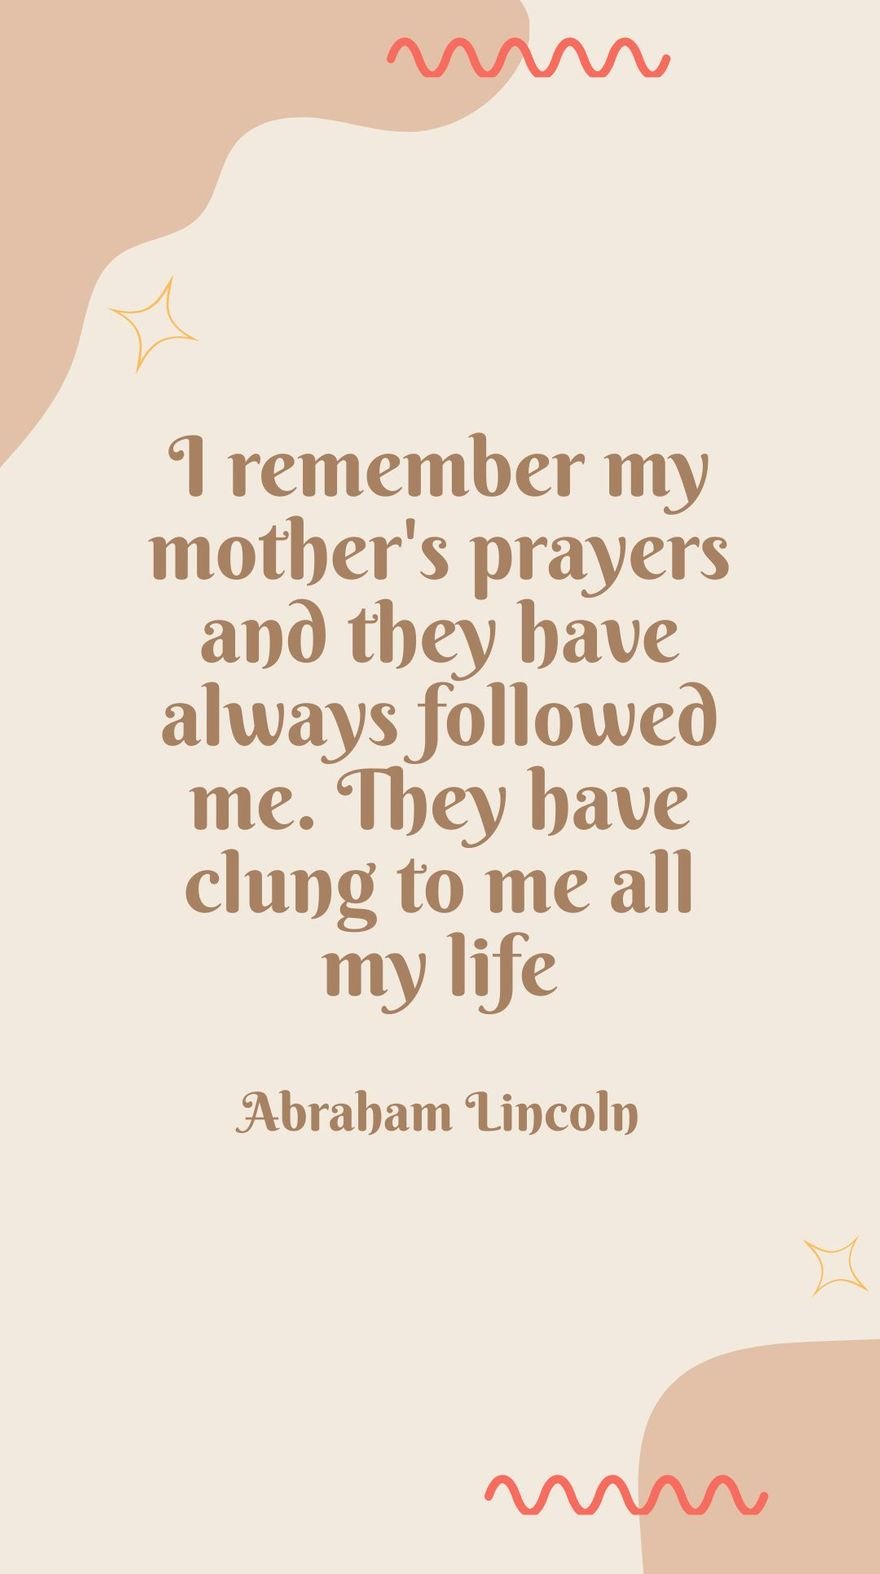 Free Abraham Lincoln - I remember my mother's prayers and they have always followed me. They have clung to me all my life.  in JPG